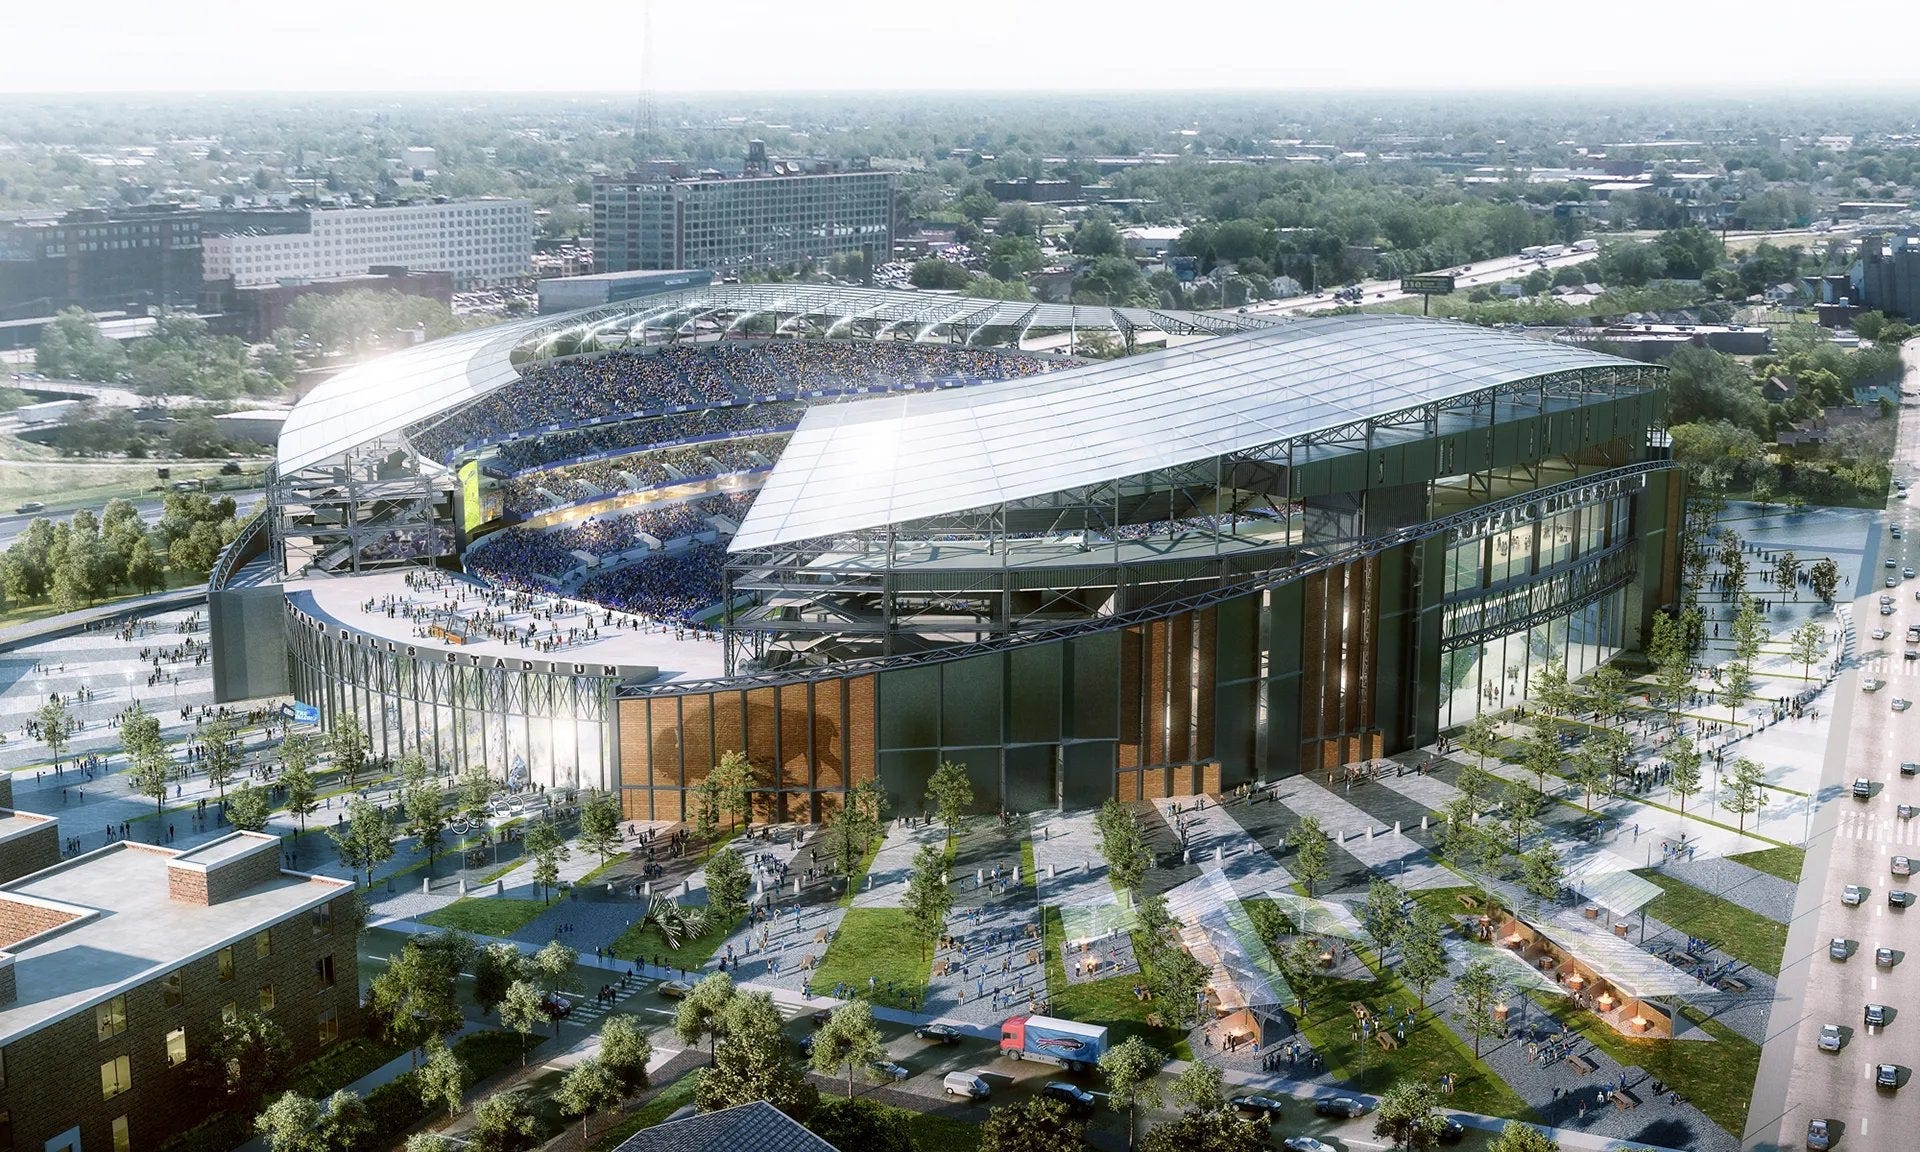 Buffalo Bills stadium deal: How business leaders from M&T